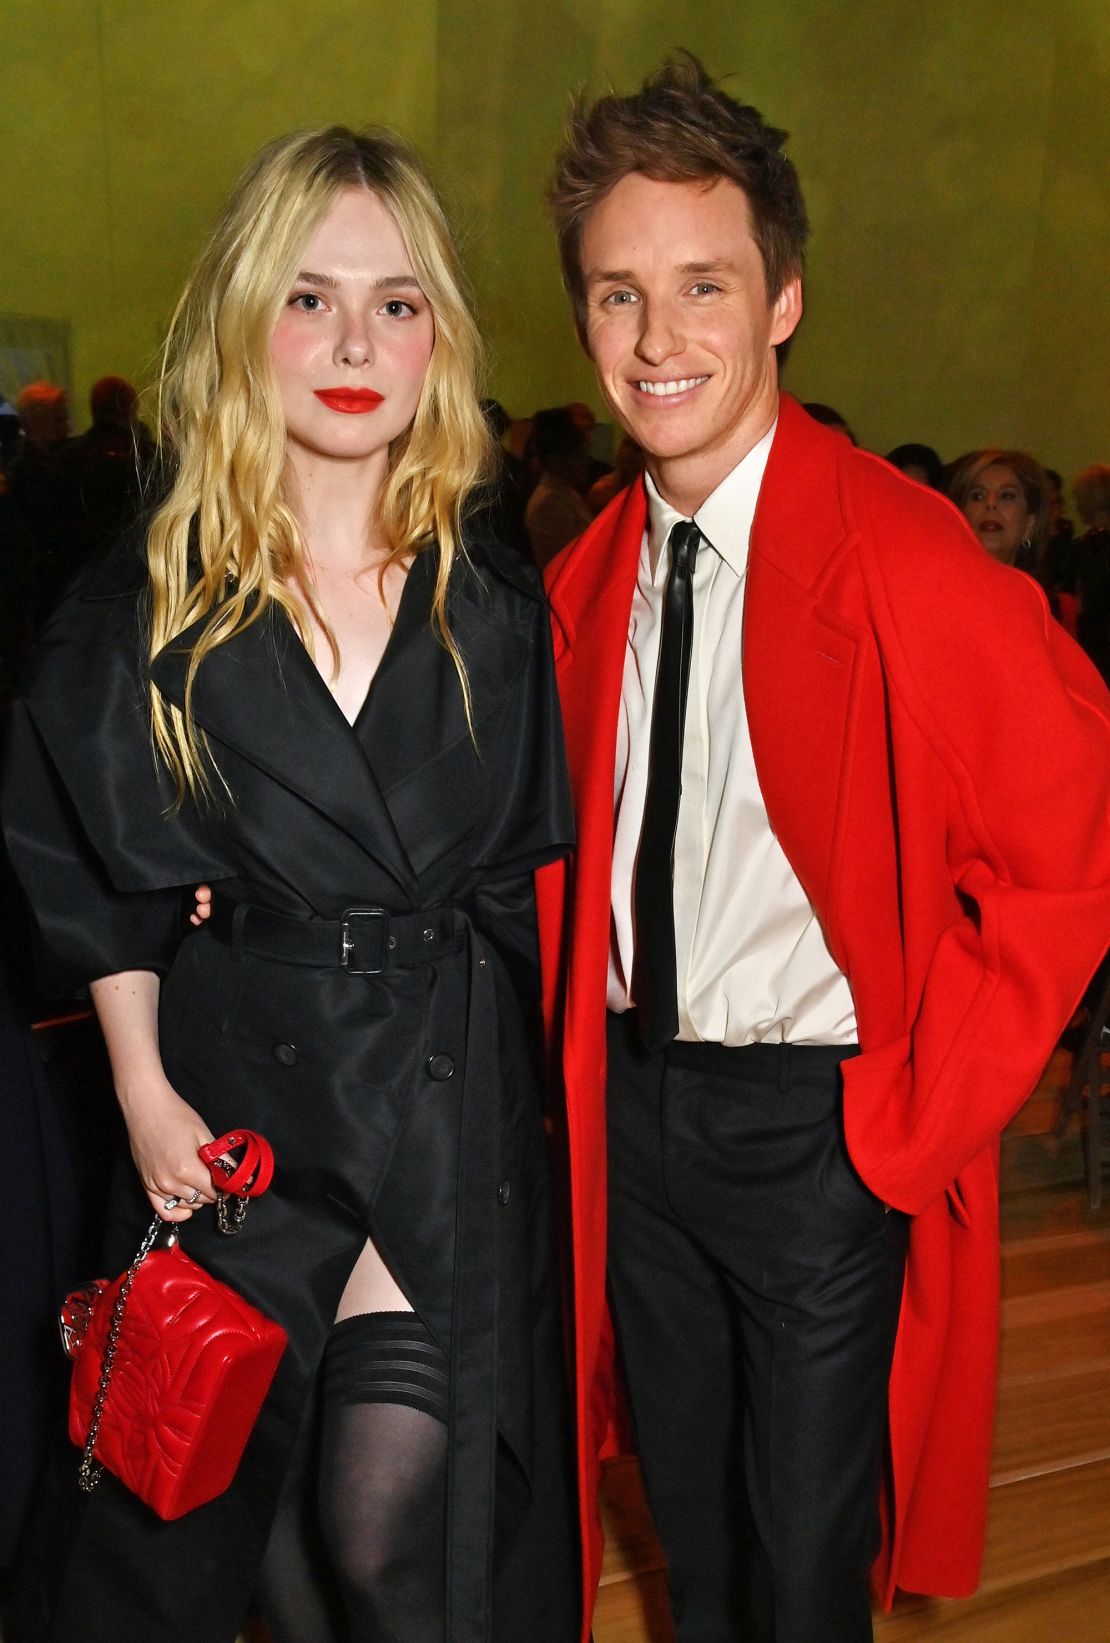 Elle Fanning and Eddie Redmayne front row at the Alexander McQueen show on March 4, 2023.